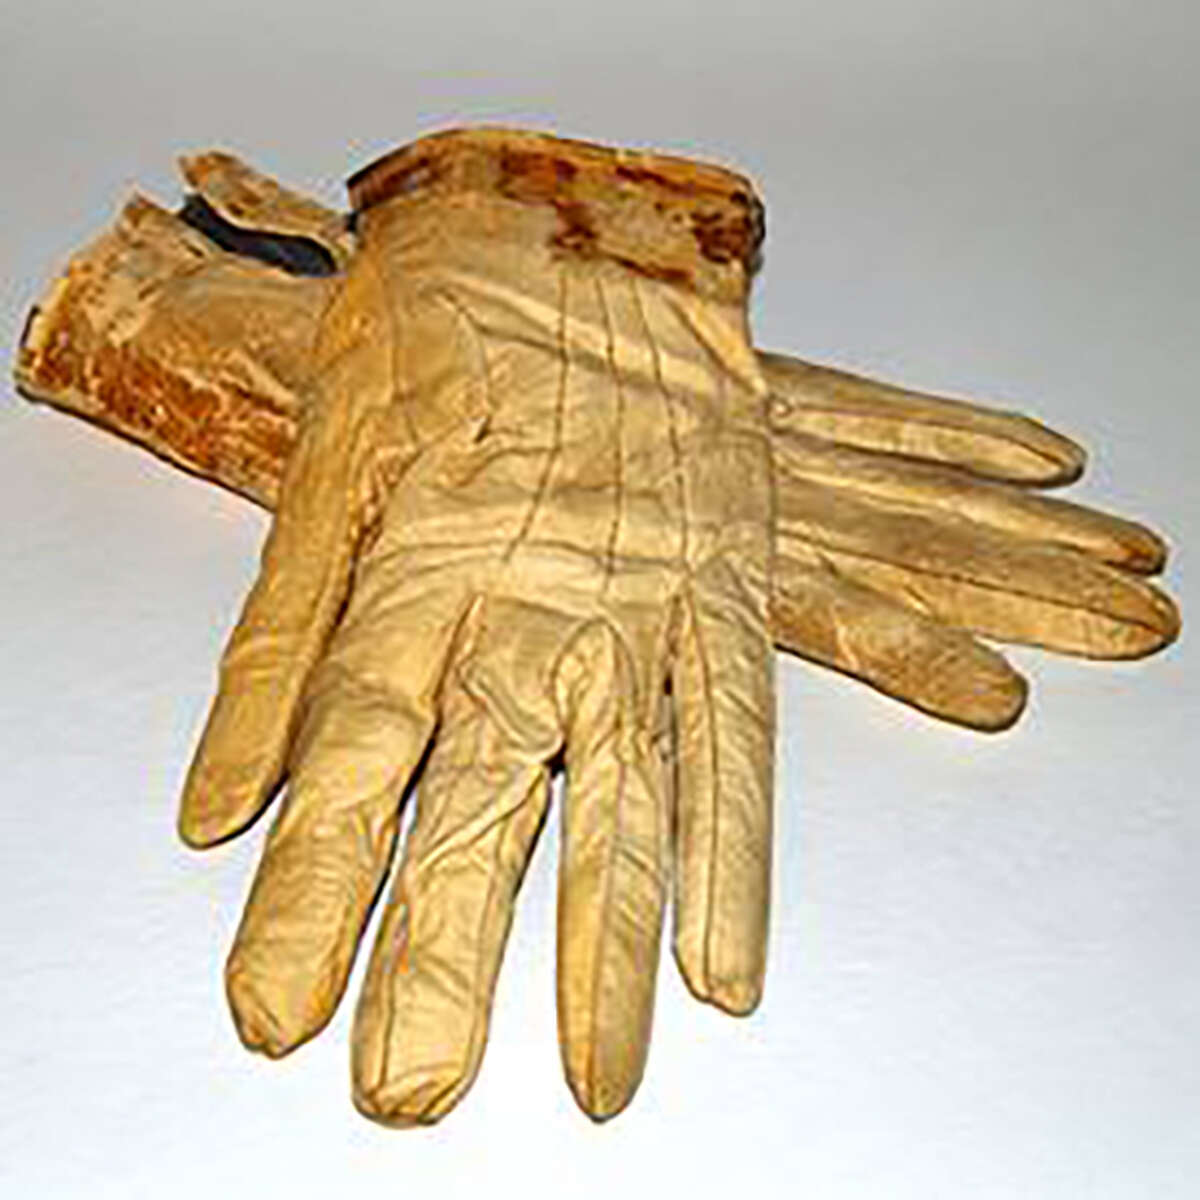 Items related to Abraham Lincoln, including the gloves he was carrying the night he was shot, will be on display through October at the Abraham Lincoln Presidential Library and Museum. 